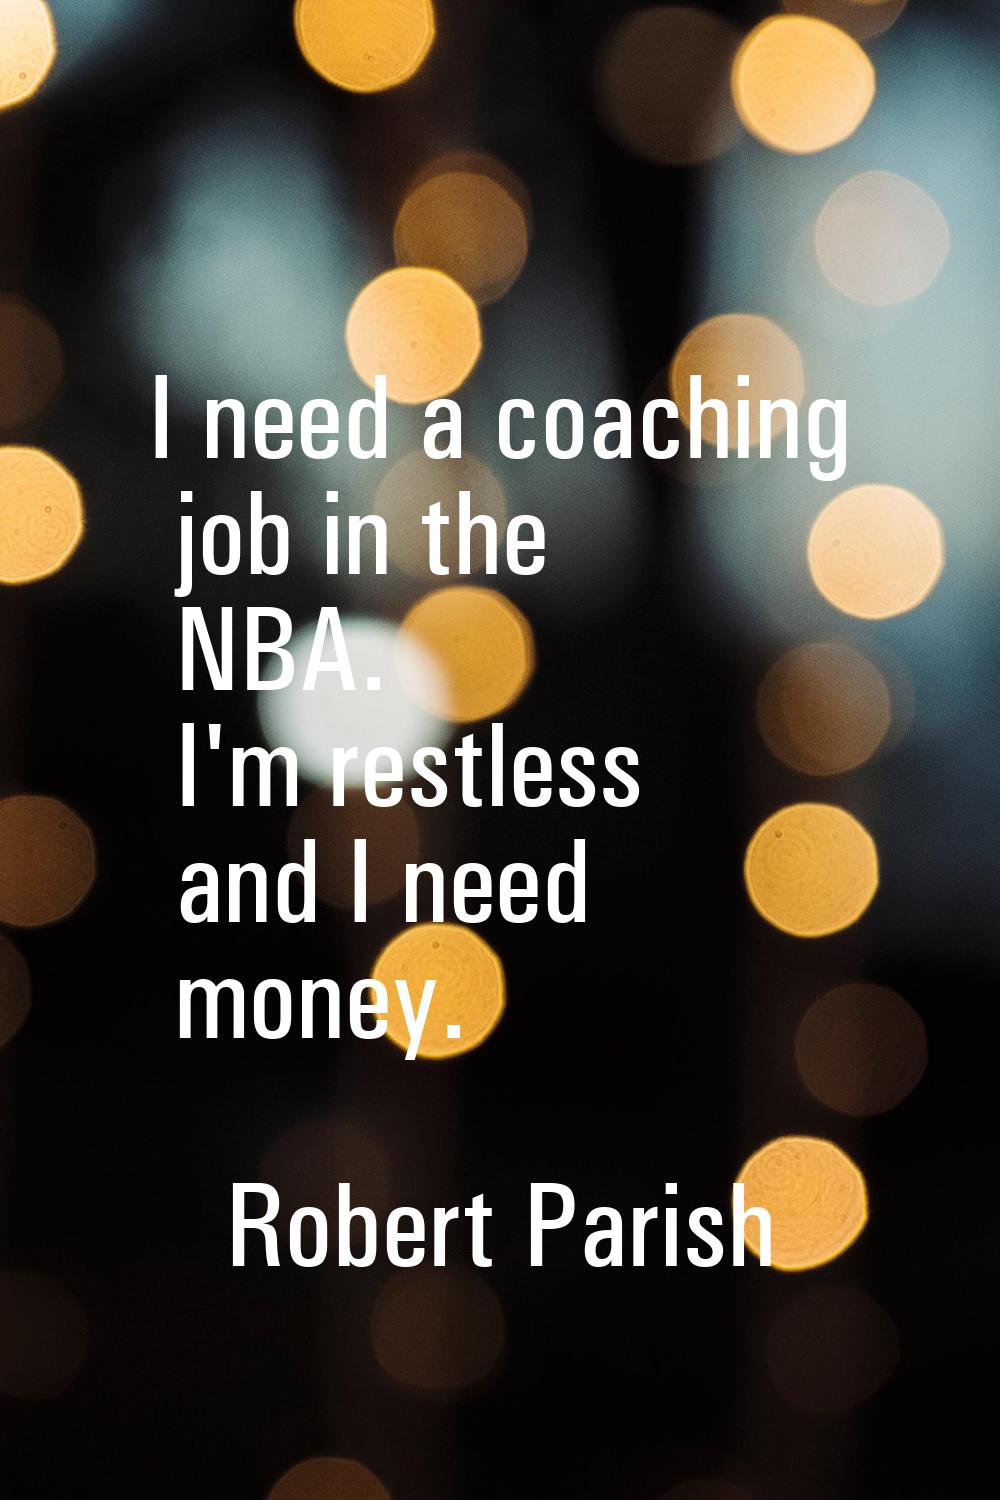 I need a coaching job in the NBA. I'm restless and I need money.